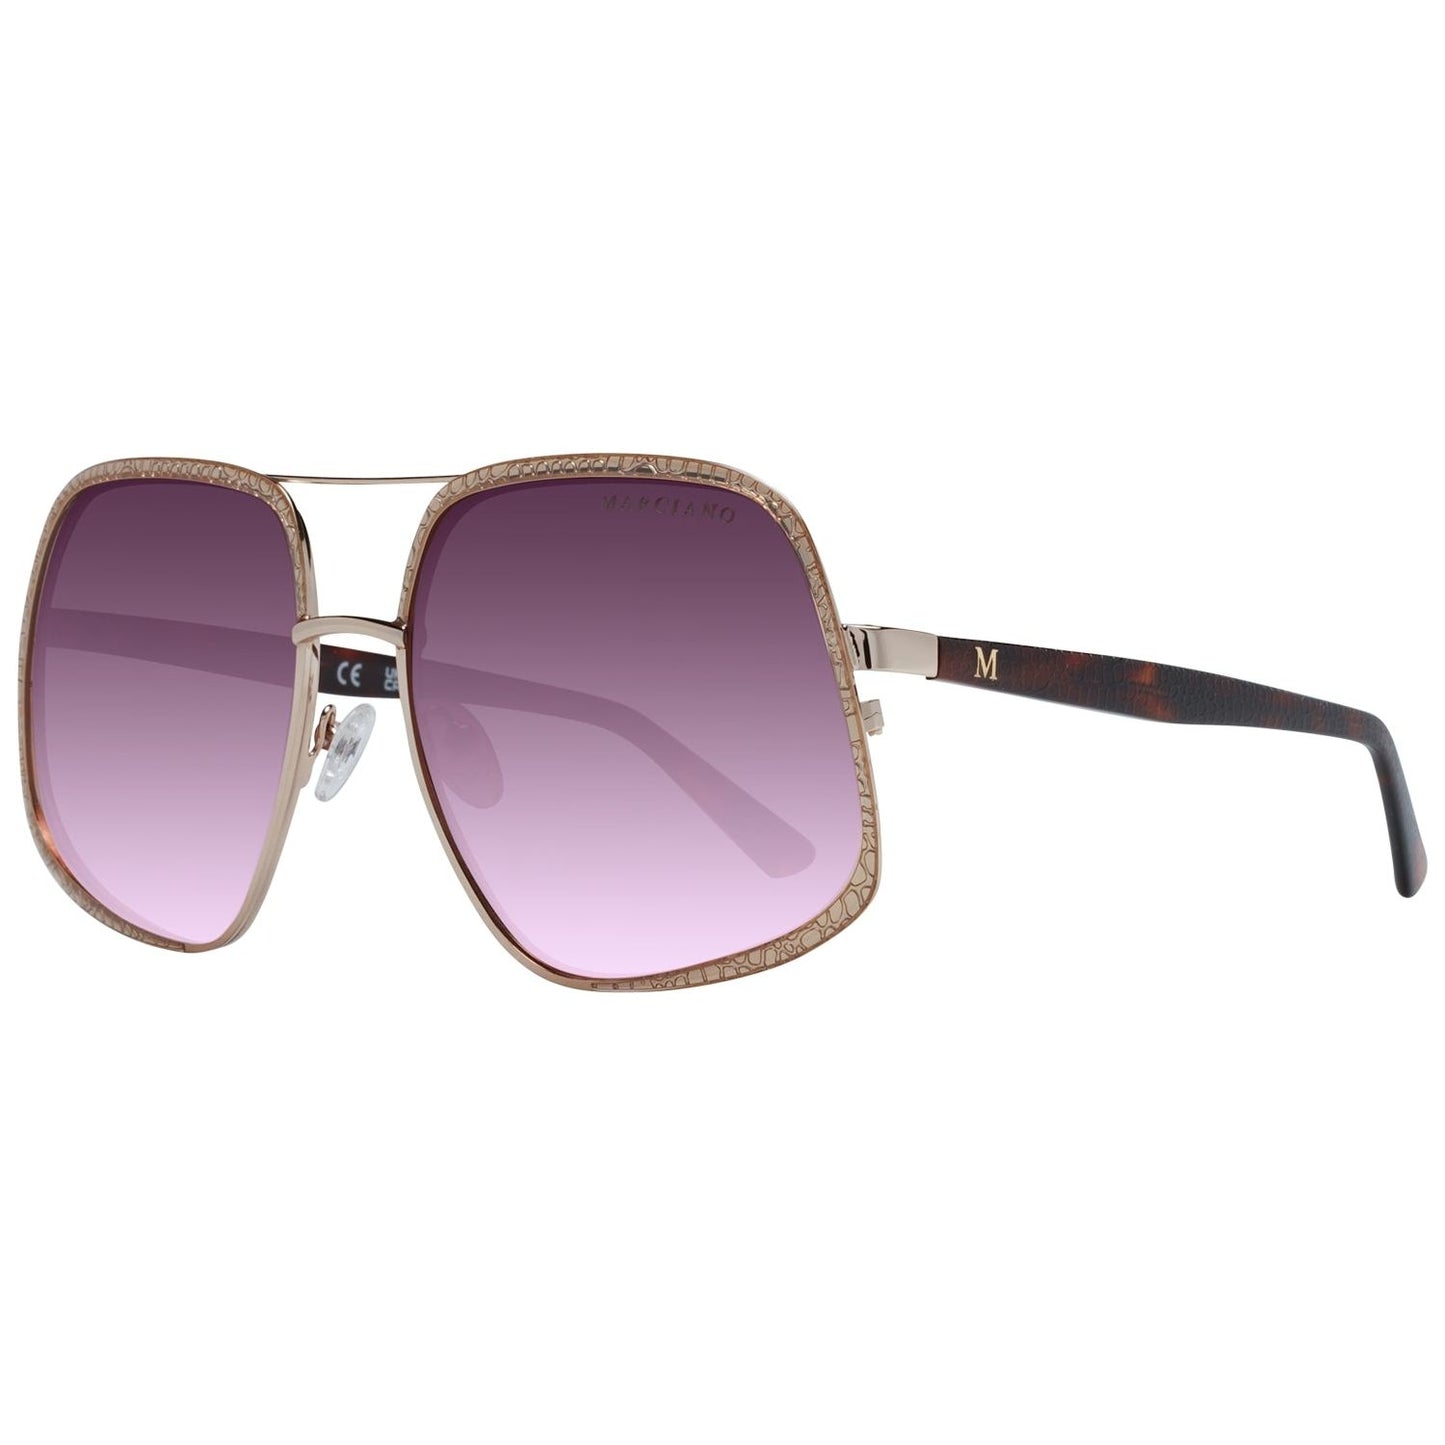 MARCIANO By GUESS SUNGLASSES MARCIANO BY GUESS MOD. GM0826 6032T SUNGLASSES & EYEWEAR marciano-by-guess-mod-gm0826-6032t